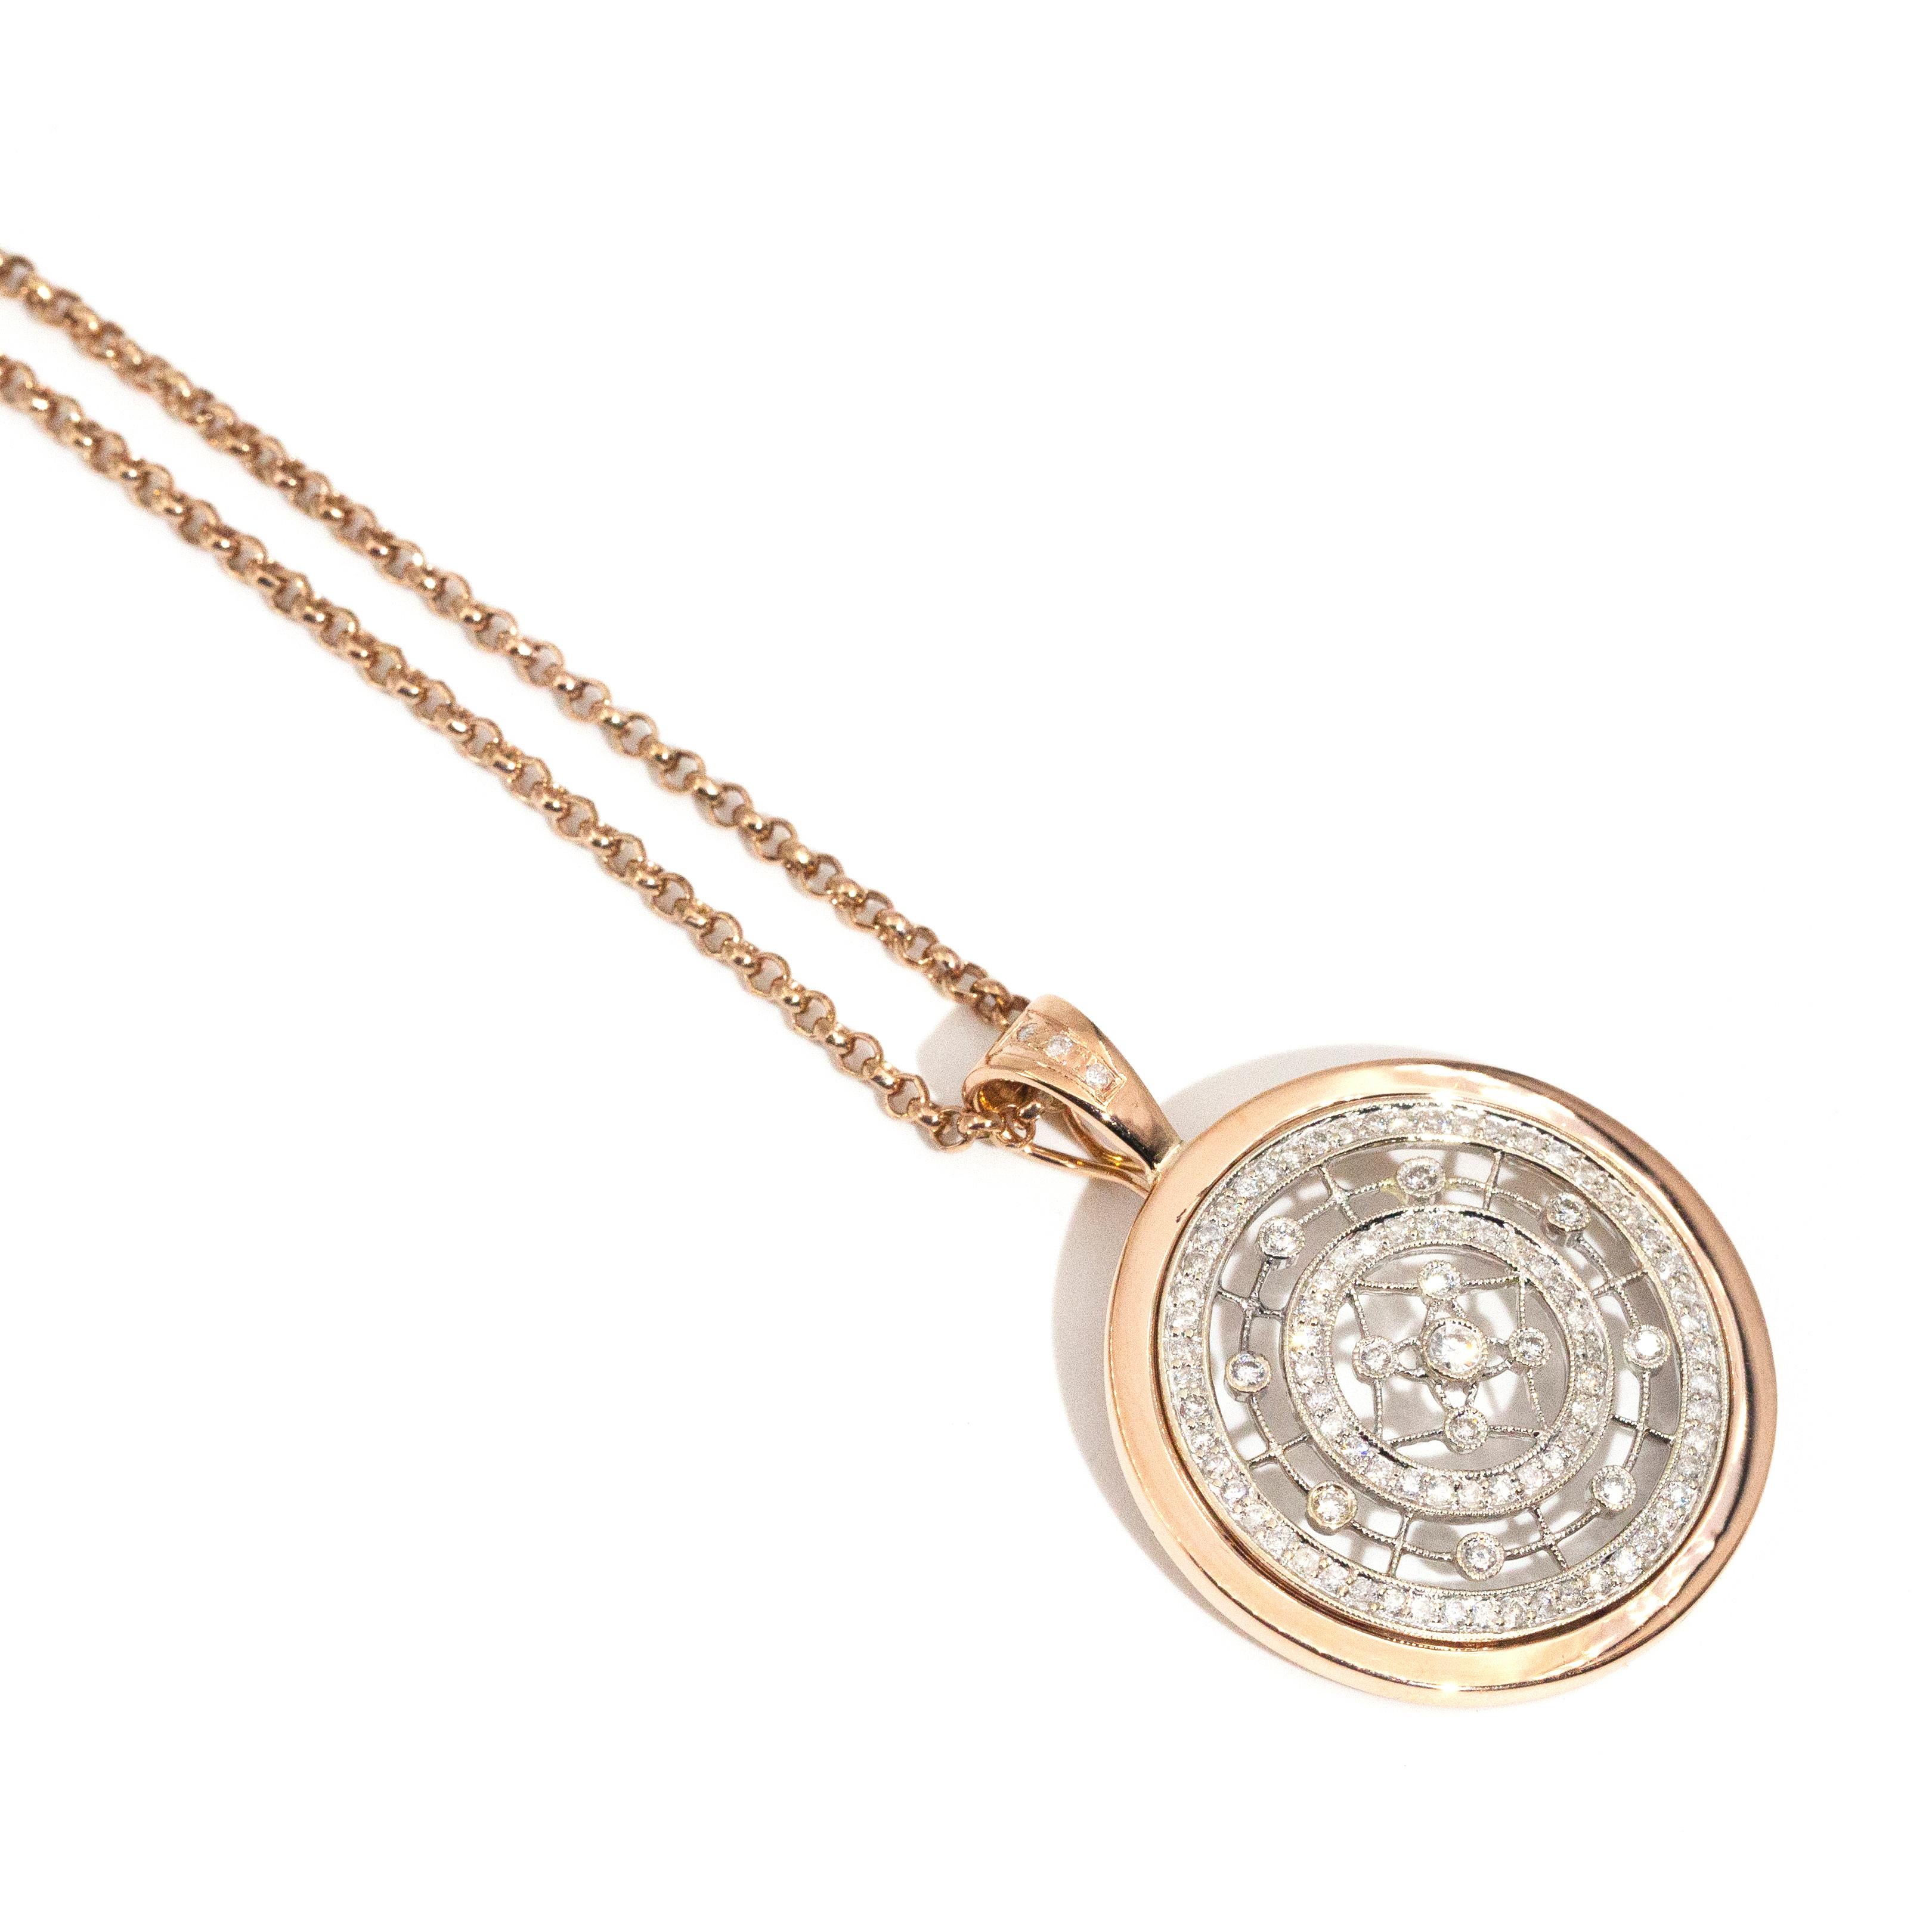 Circa 1980s 9 Carat Rose and White Gold Diamond Disc Enhancer Pendant and Chain 8